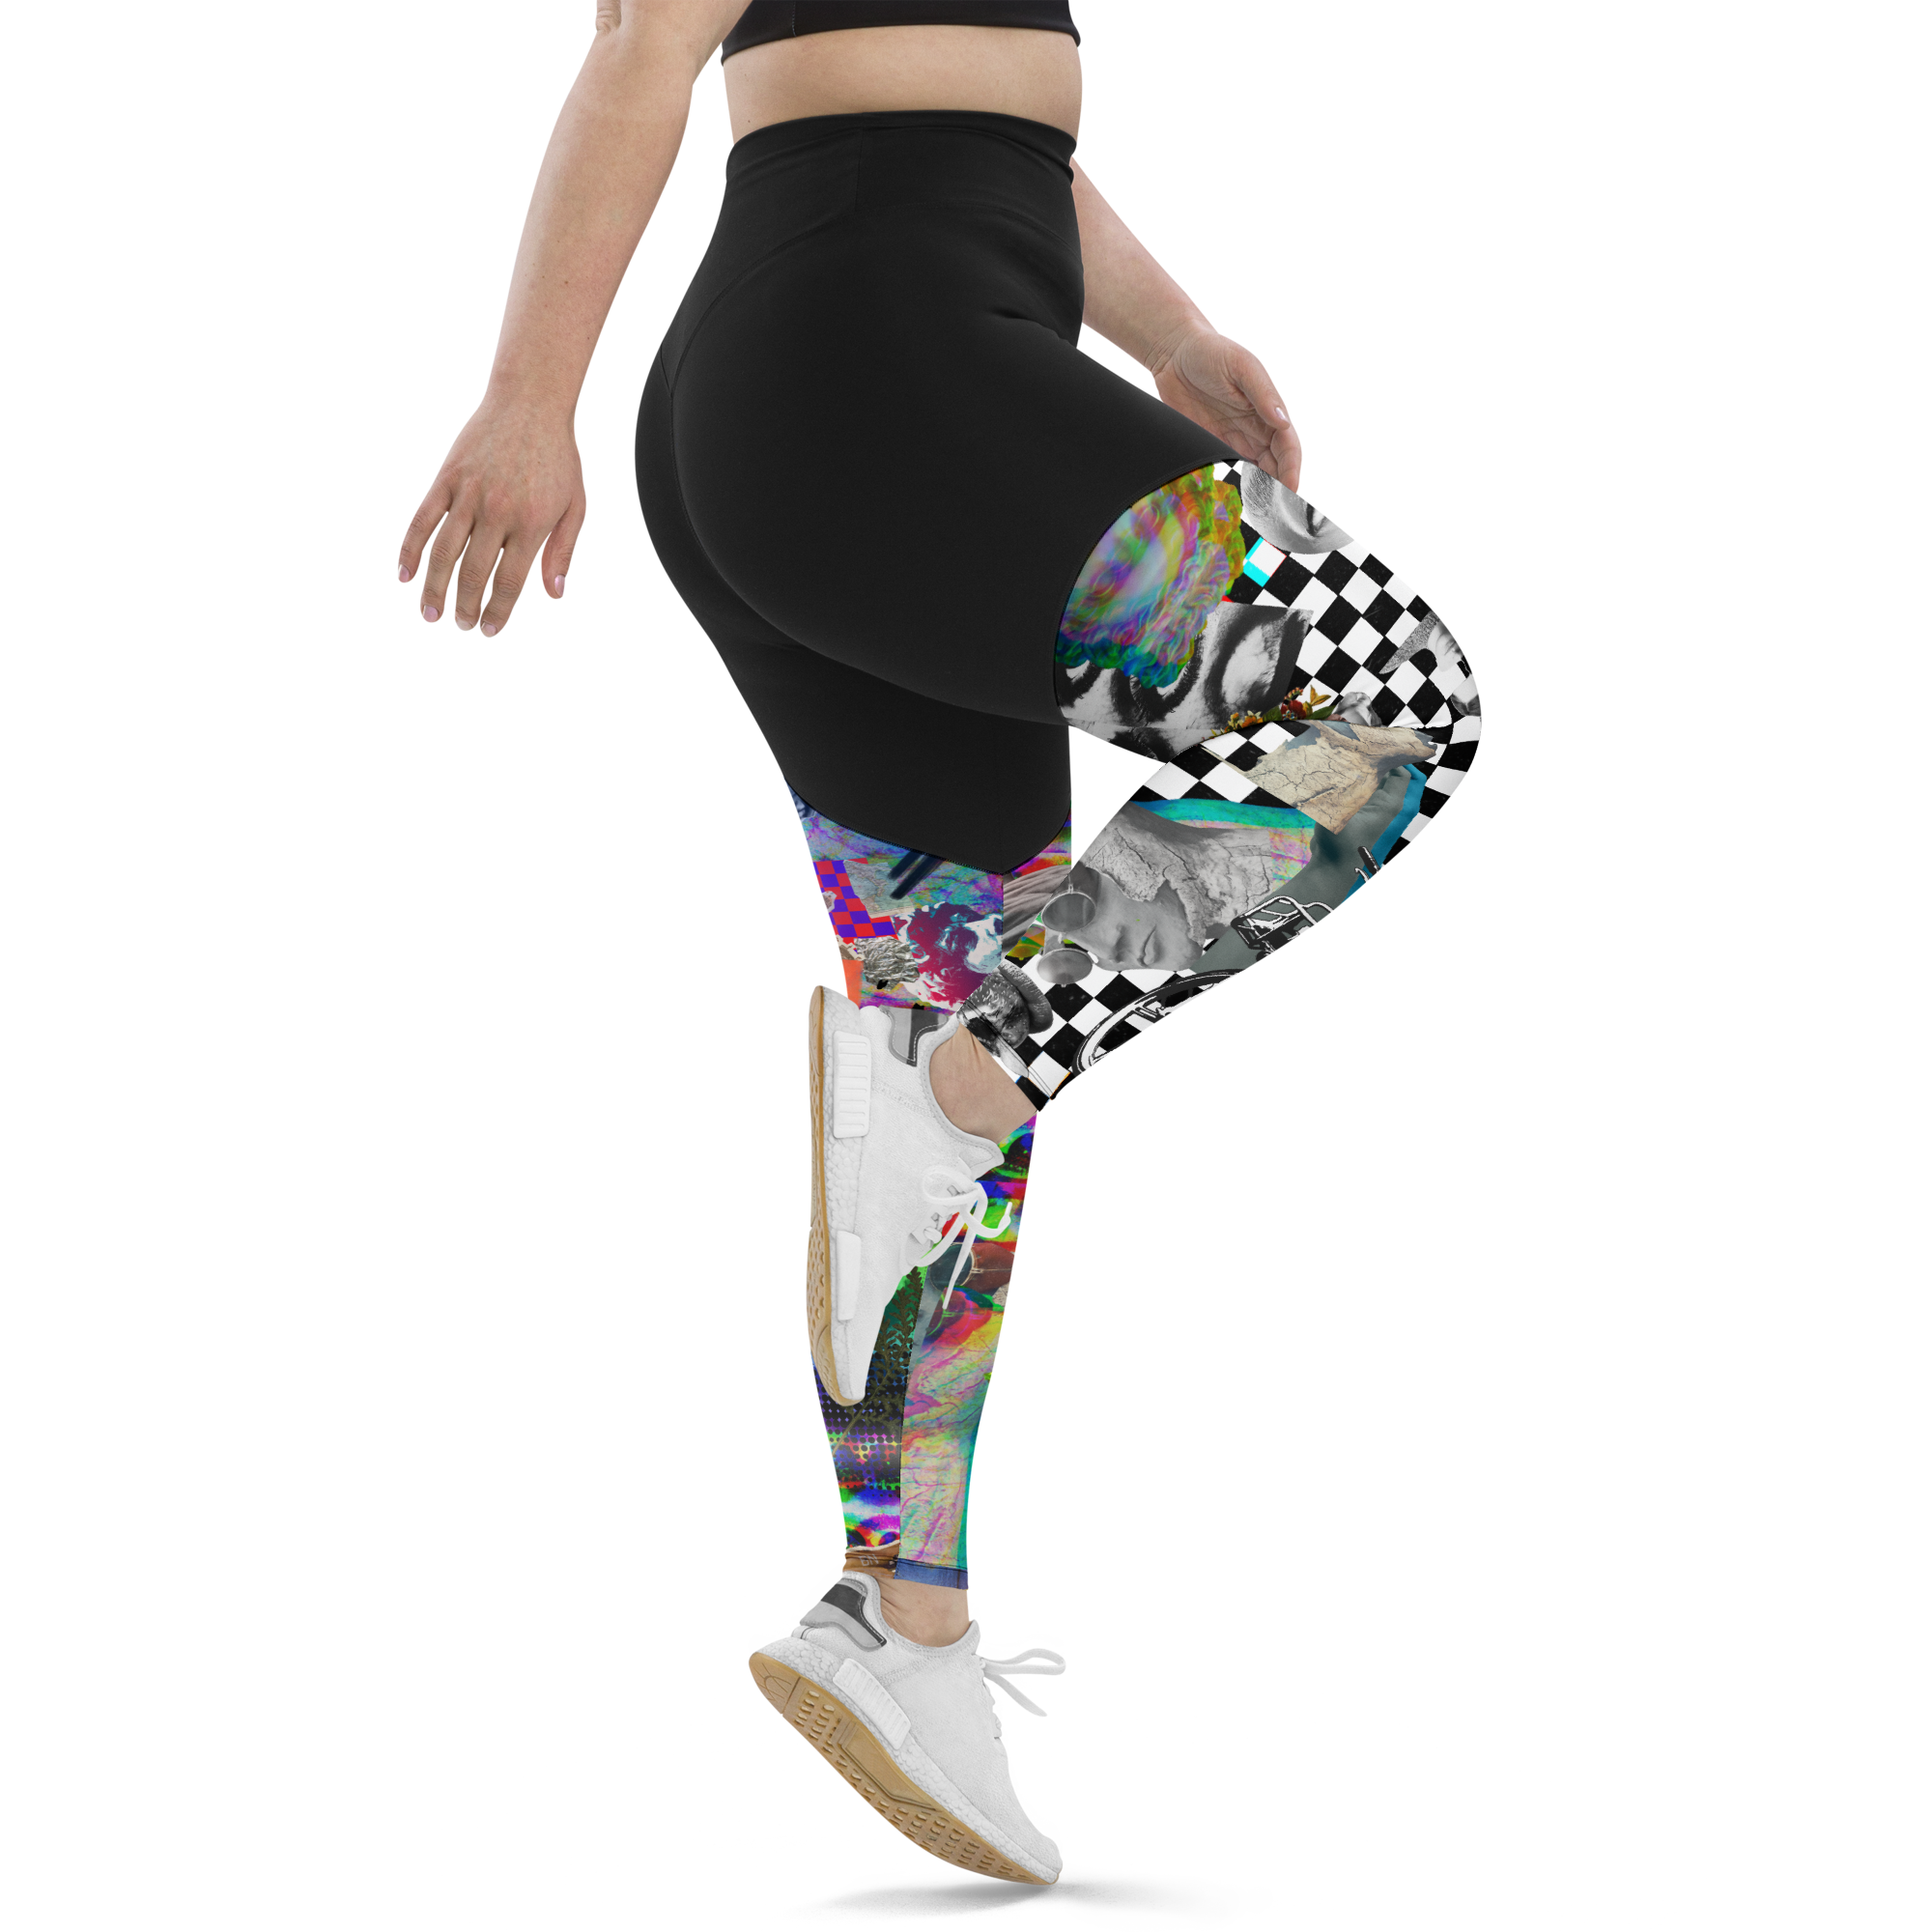 Stratified compression/sports Leggings